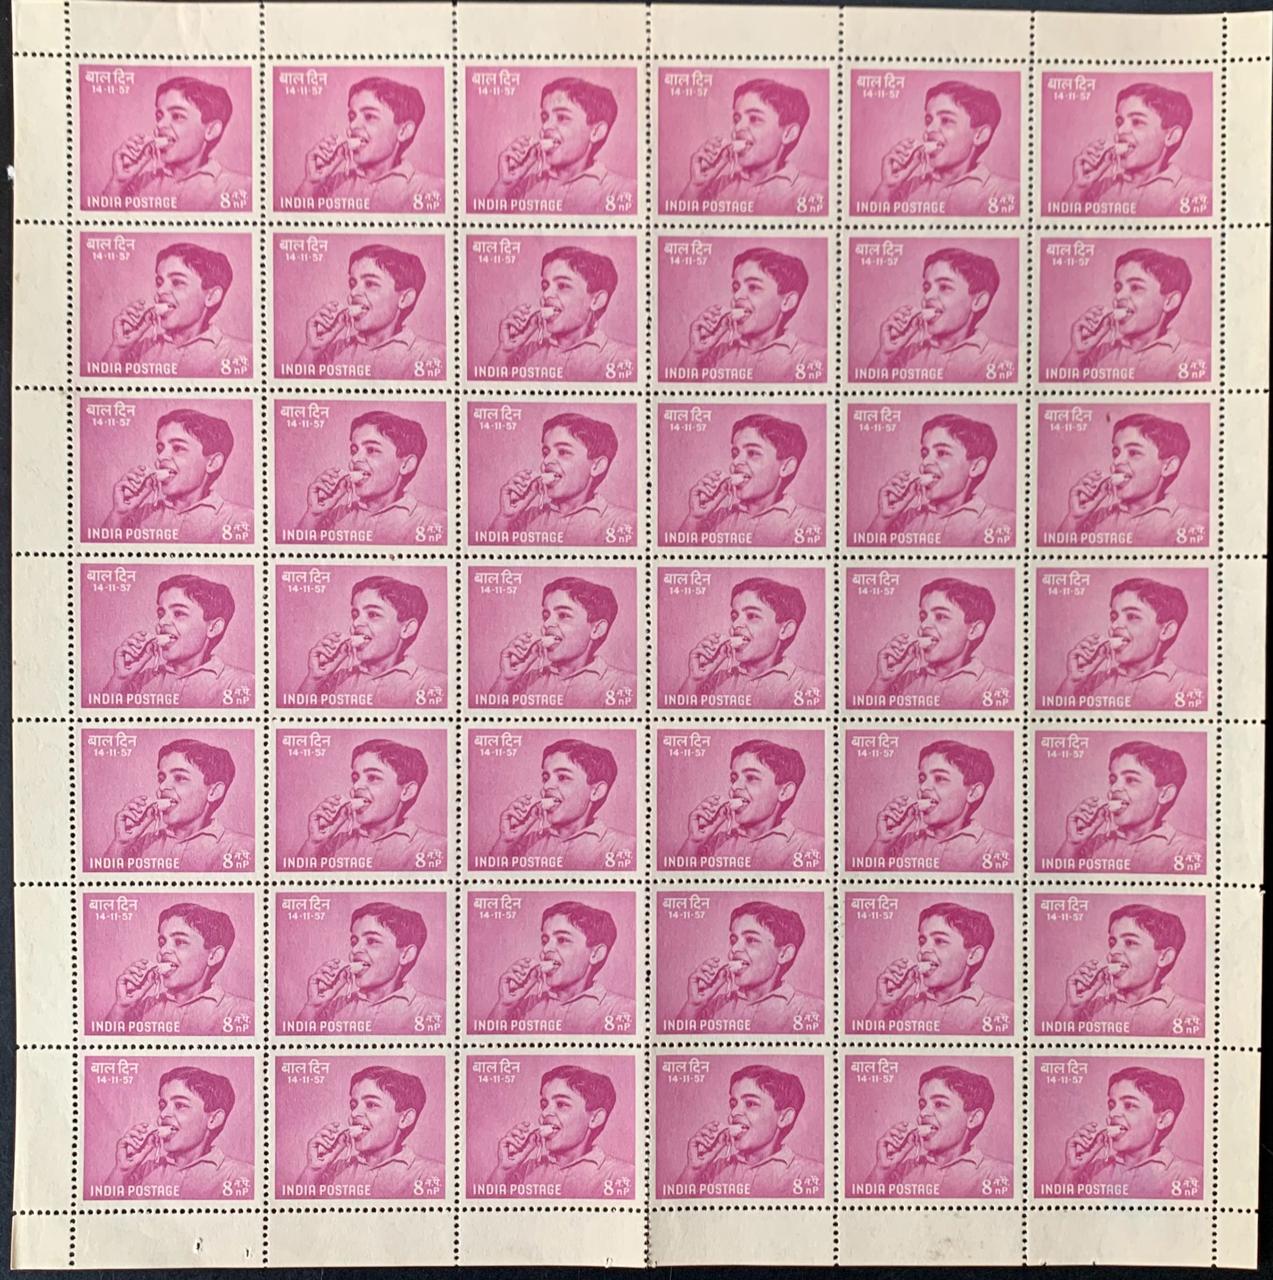 India 1957 National Children's Day "Nutrition"  Full Sheets